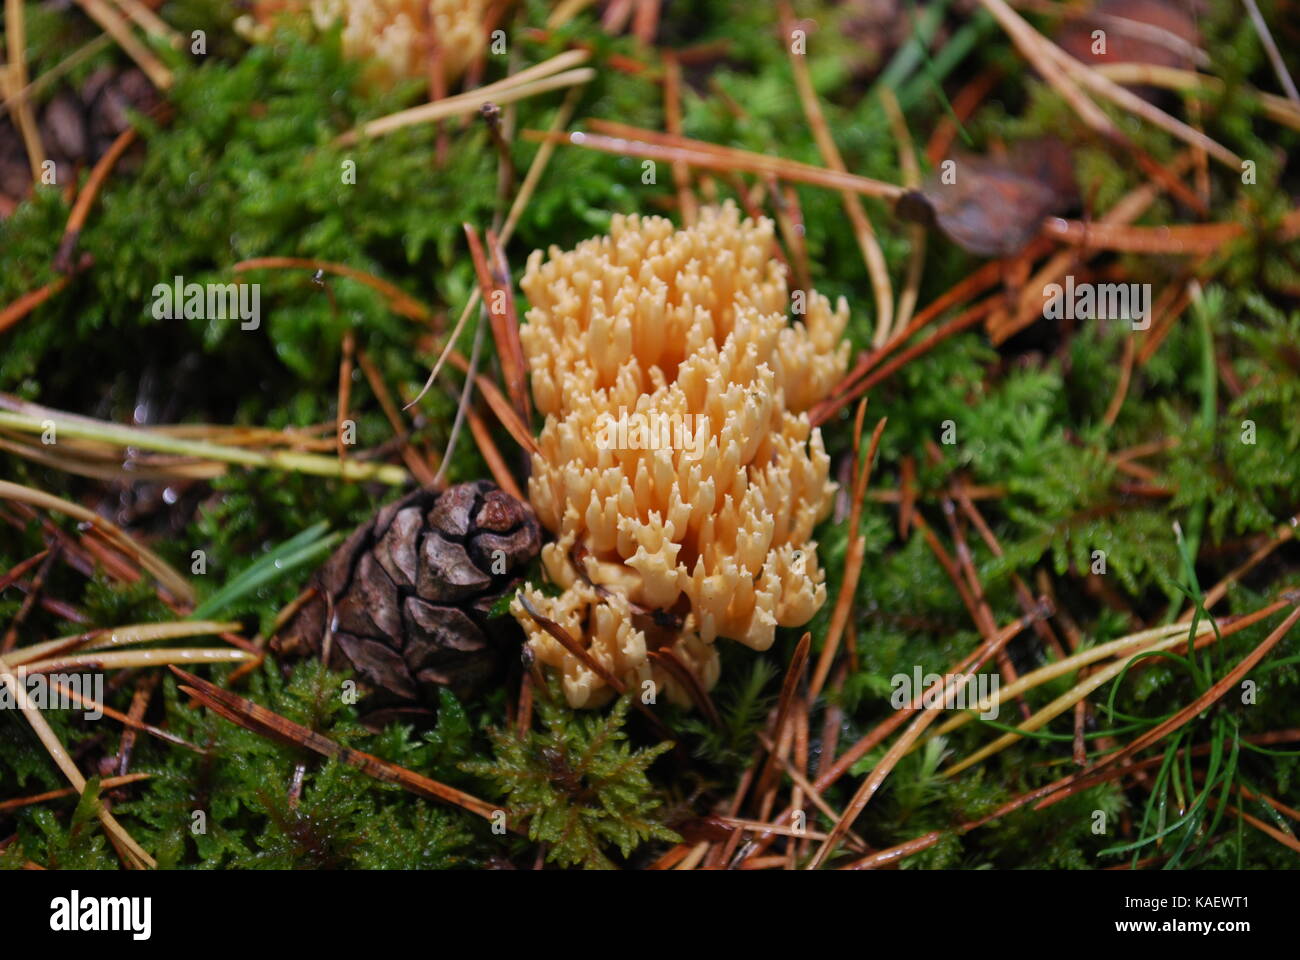 Ramaria aurea is a coral mushroom in the family Gomphaceae grow in the forest. Stock Photo